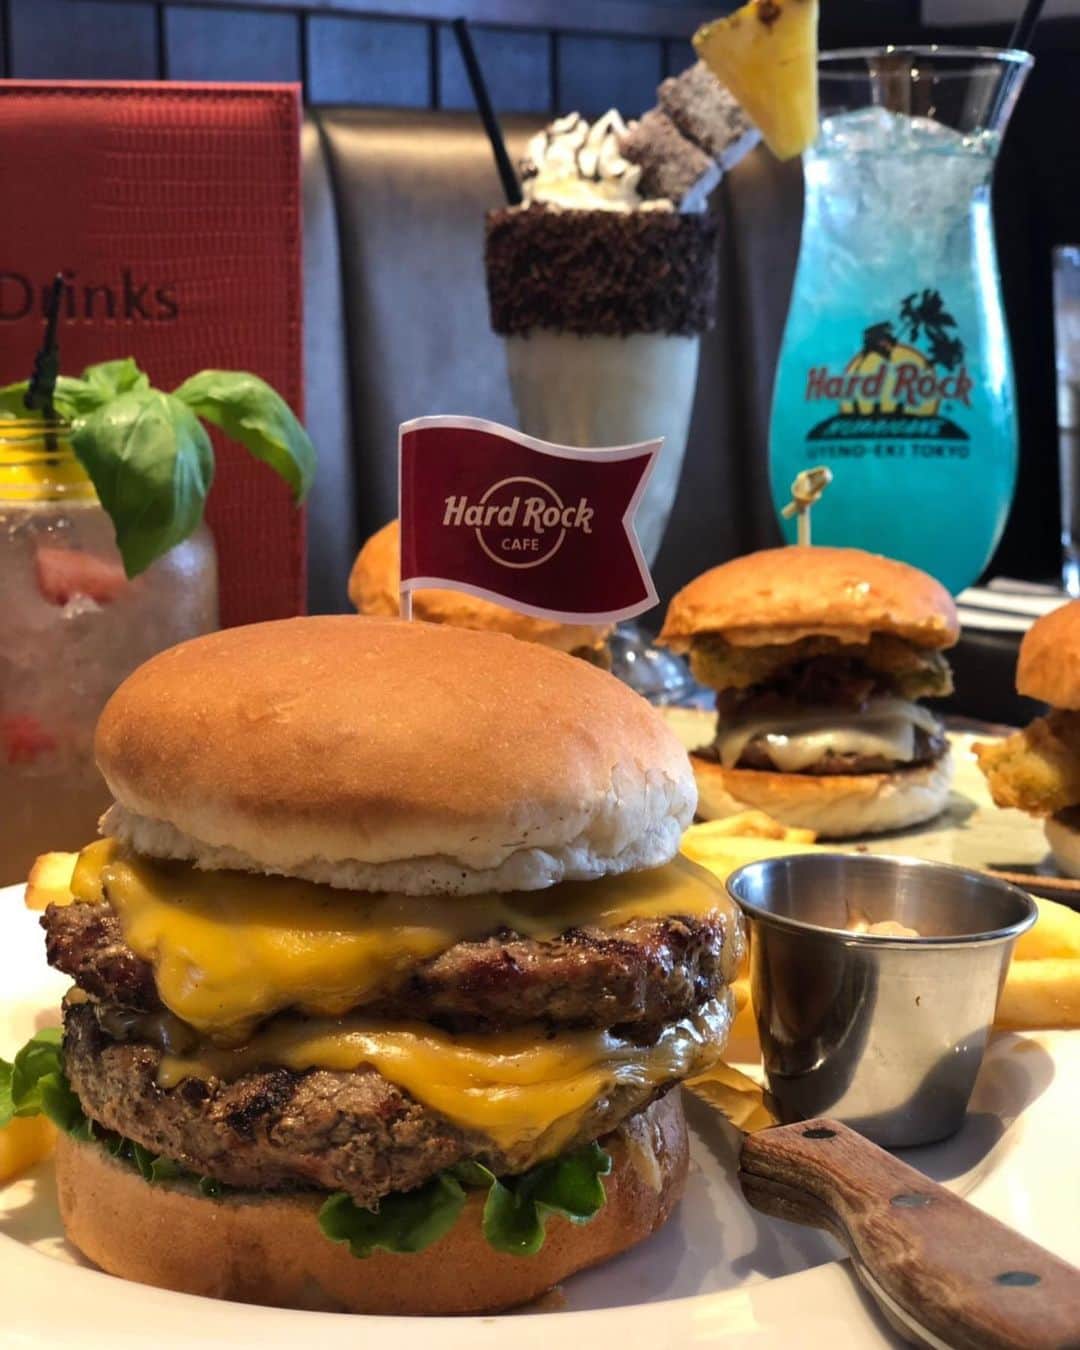 Sayaka.Mさんのインスタグラム写真 - (Sayaka.MInstagram)「. AD I had lunch at Hard Rock Cafe in Ueno and the Hamburger with topics was quite delicious ❣️ This is my favorite hard rock cafe menu I've ever eaten😌✨ Although it was BIG size, I ate it effortlessly.  Three burger series were easy to share! Avocado fry was delicious. The cute drink contains vanilla vodka and has chocolate on the cup. Hard Rock Cafe is currently running a sweepstakes to giveaway 25 ~ 100 $ gift certificates to @hrcuyenoekitokyo. ============================== To enter:  1) Follow @hrcuyenoekitokyo 2) Follow @insta.sayaka 3) Leave a comment tagging a friend to go to Hard Rock Cafe with you ============================== The Ueno store is easy to visit, and many guests ordered hamburger sets and steak sets at lunch, so I would like to try those next @hrcuyenoekitokyo #hardrockcafe #sweepstakes #HardRockCafeOfficial Sweepstakes Rules can be found here: https://izea.it/aYCmwhn . 先日は上野のハードロックカフェでランチ ボリュームたっぷりのバーガー🍔がかなり美味しかったんです❣️ ハードロックカフェのロンドン一号店で最初に出たメニューにインスパイアされた、オーソドックスな組み合わせの中にハードロックカフェらしさがあるバーガーは、今まで食べたハードロックのメニューで私的に一番好きかも😌✨ しっかりとしていながらも、しつこさがなくかなりのBIG sizeなのにペロッと食べちゃいました。 3つのバーガーシリーズはシェアしやすくてアボガドフライがまた美味しかったよ 映えなドリンクは🥤バニラウォッカが入っているんです。グラス周りのチョコが可愛い❤️ ハードロックカフェでは今キャンペーンをやっています。皆さん是非是非参加してね✨ 25~100$のギフト券を配布します ============================== 参加方法は ① @hrcuyenoekitokyo をフォロー ②@insta.sayaka をフォロー ②③連れていきたい友達をタグ付けして私のコメント欄にメッセージを残すだけ🤳 ============================== 上野店は入りやすいし、女子のランチのハンバーグセットや、ステーキセット🥩の注文率かなり高かったから私も次食べたいな🤤 . 私の食べ歩きの記録は Gourmet food information 제 외식기록 ↓↓↓ #sayaka動画 . . #ハンバーガー #ハンバーガー部 #ハンバーガー巡り #東京グルメ #東京カフェ #食べ歩き #キャンペーン実施中 #キャンペーン情報 #ハードロックカフェ #ハードロックカフェ東京 #札幌ママ #東京ママ #ueno #上野 #上野グルメ #hamburger #hamburguers #tokyolife #tokyocafe #上野カフェ #料理動画 #東京ランチ #カフェ巡り #カフェご飯 #カフェ好き」6月10日 6時53分 - insta.sayaka